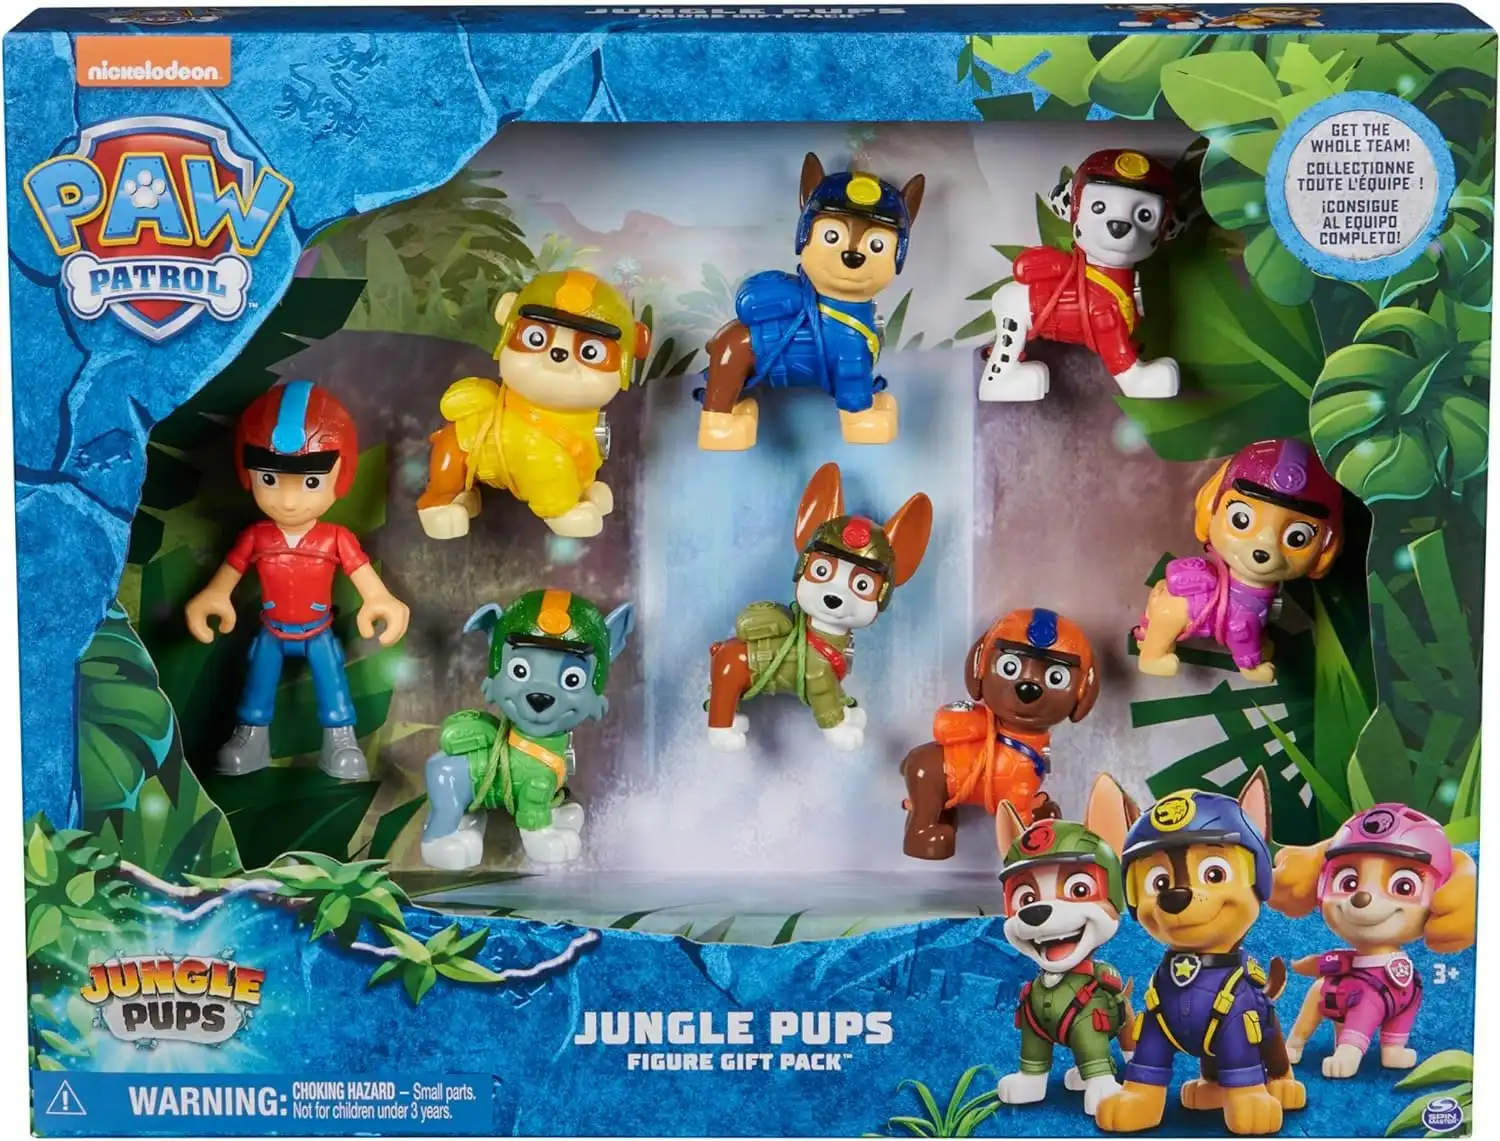 PAW Patrol: Jungle Pups Action Figures Gift Pack